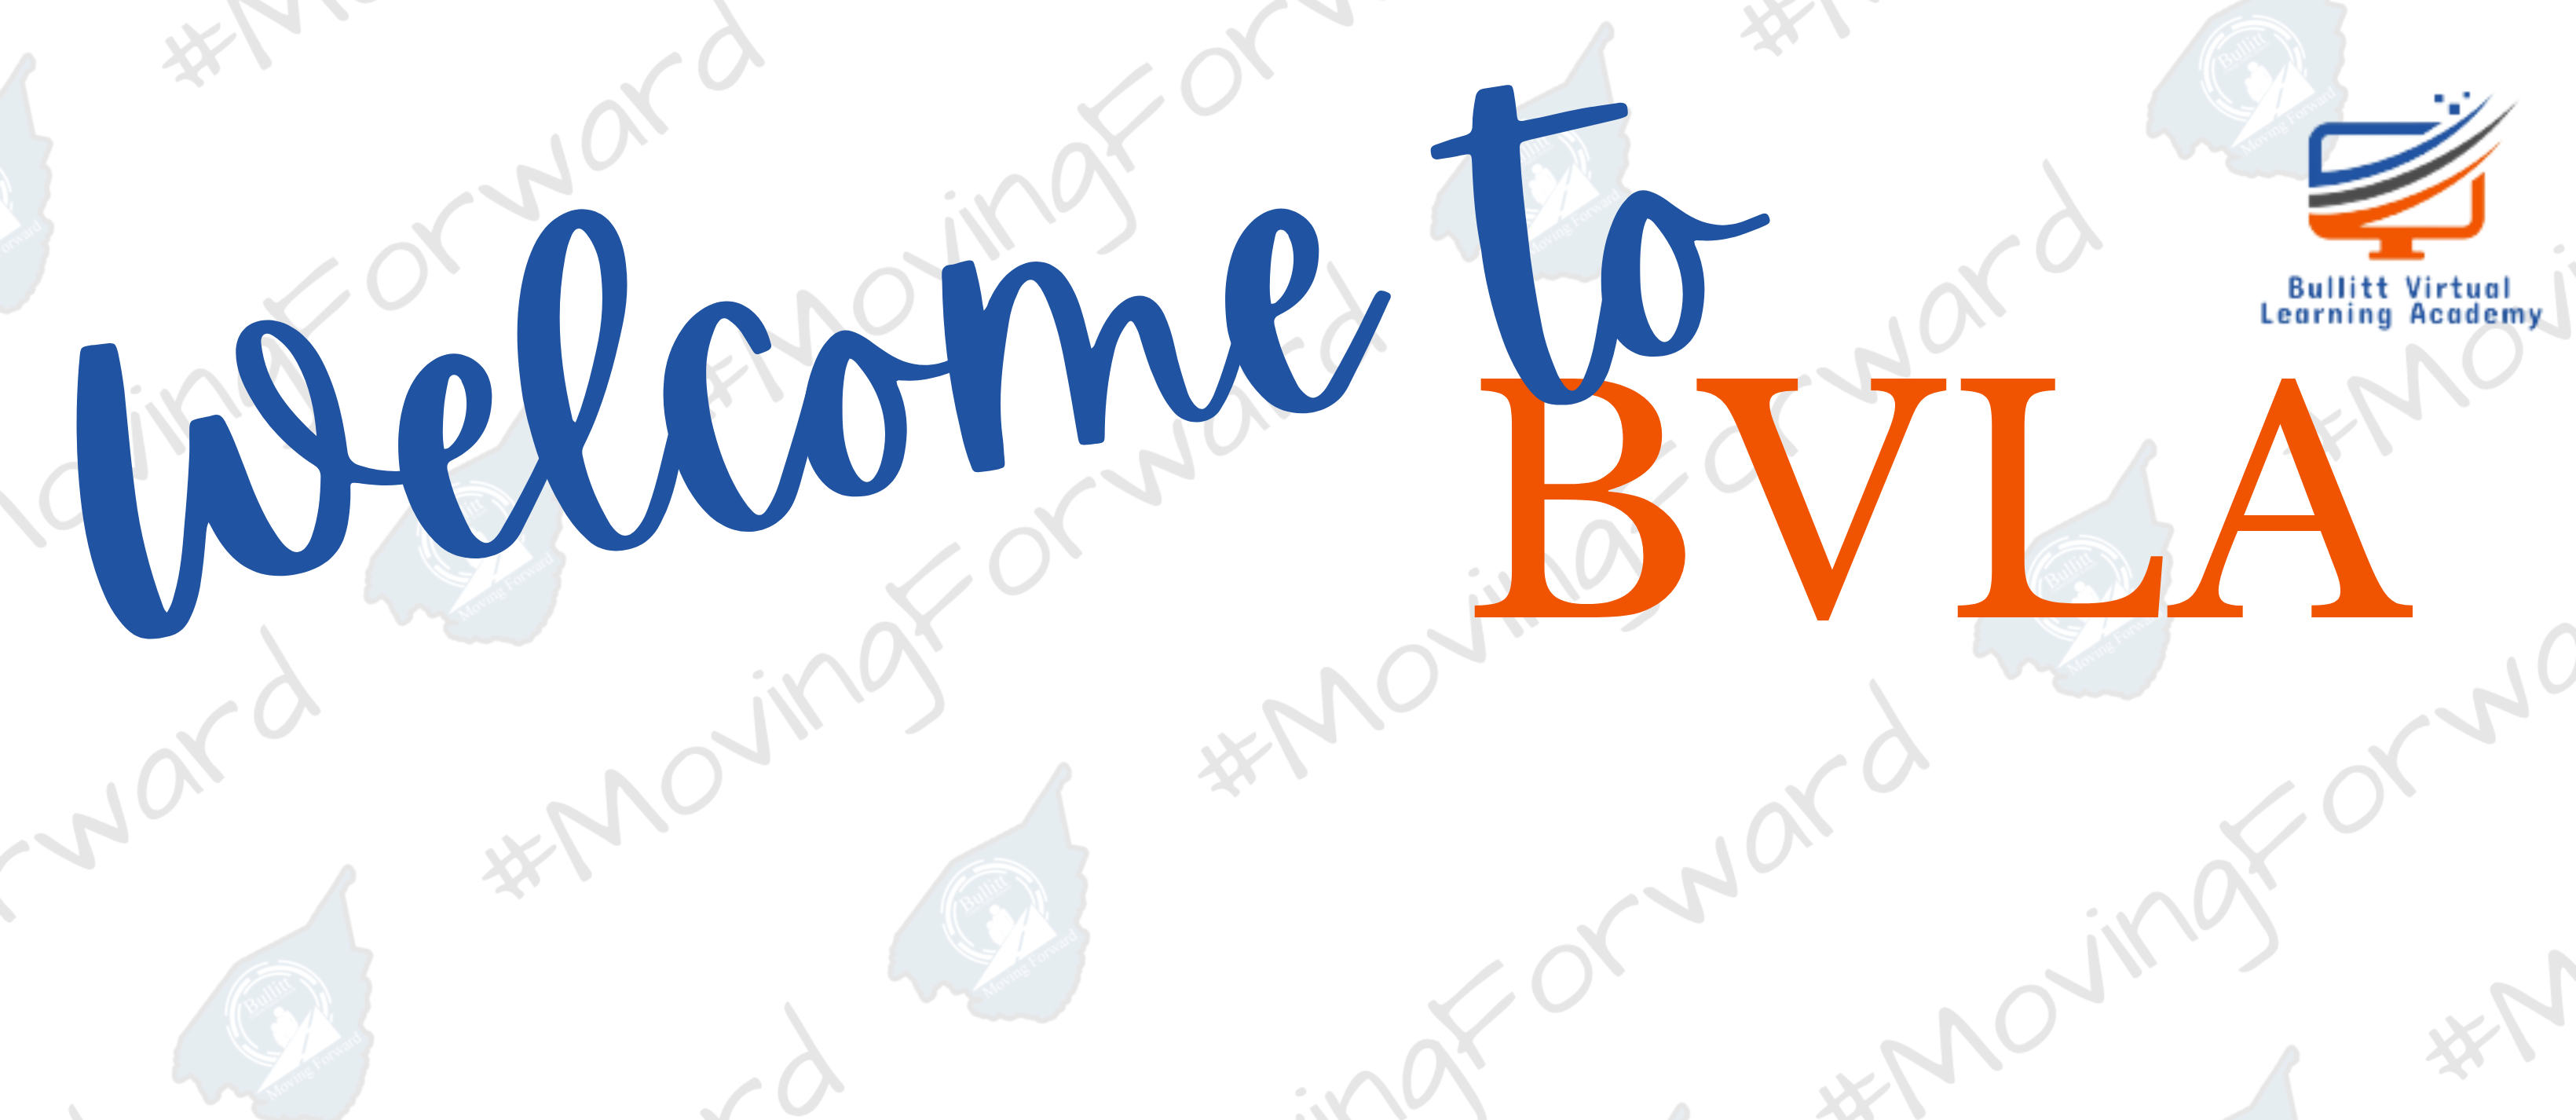 Welcome to BVLA